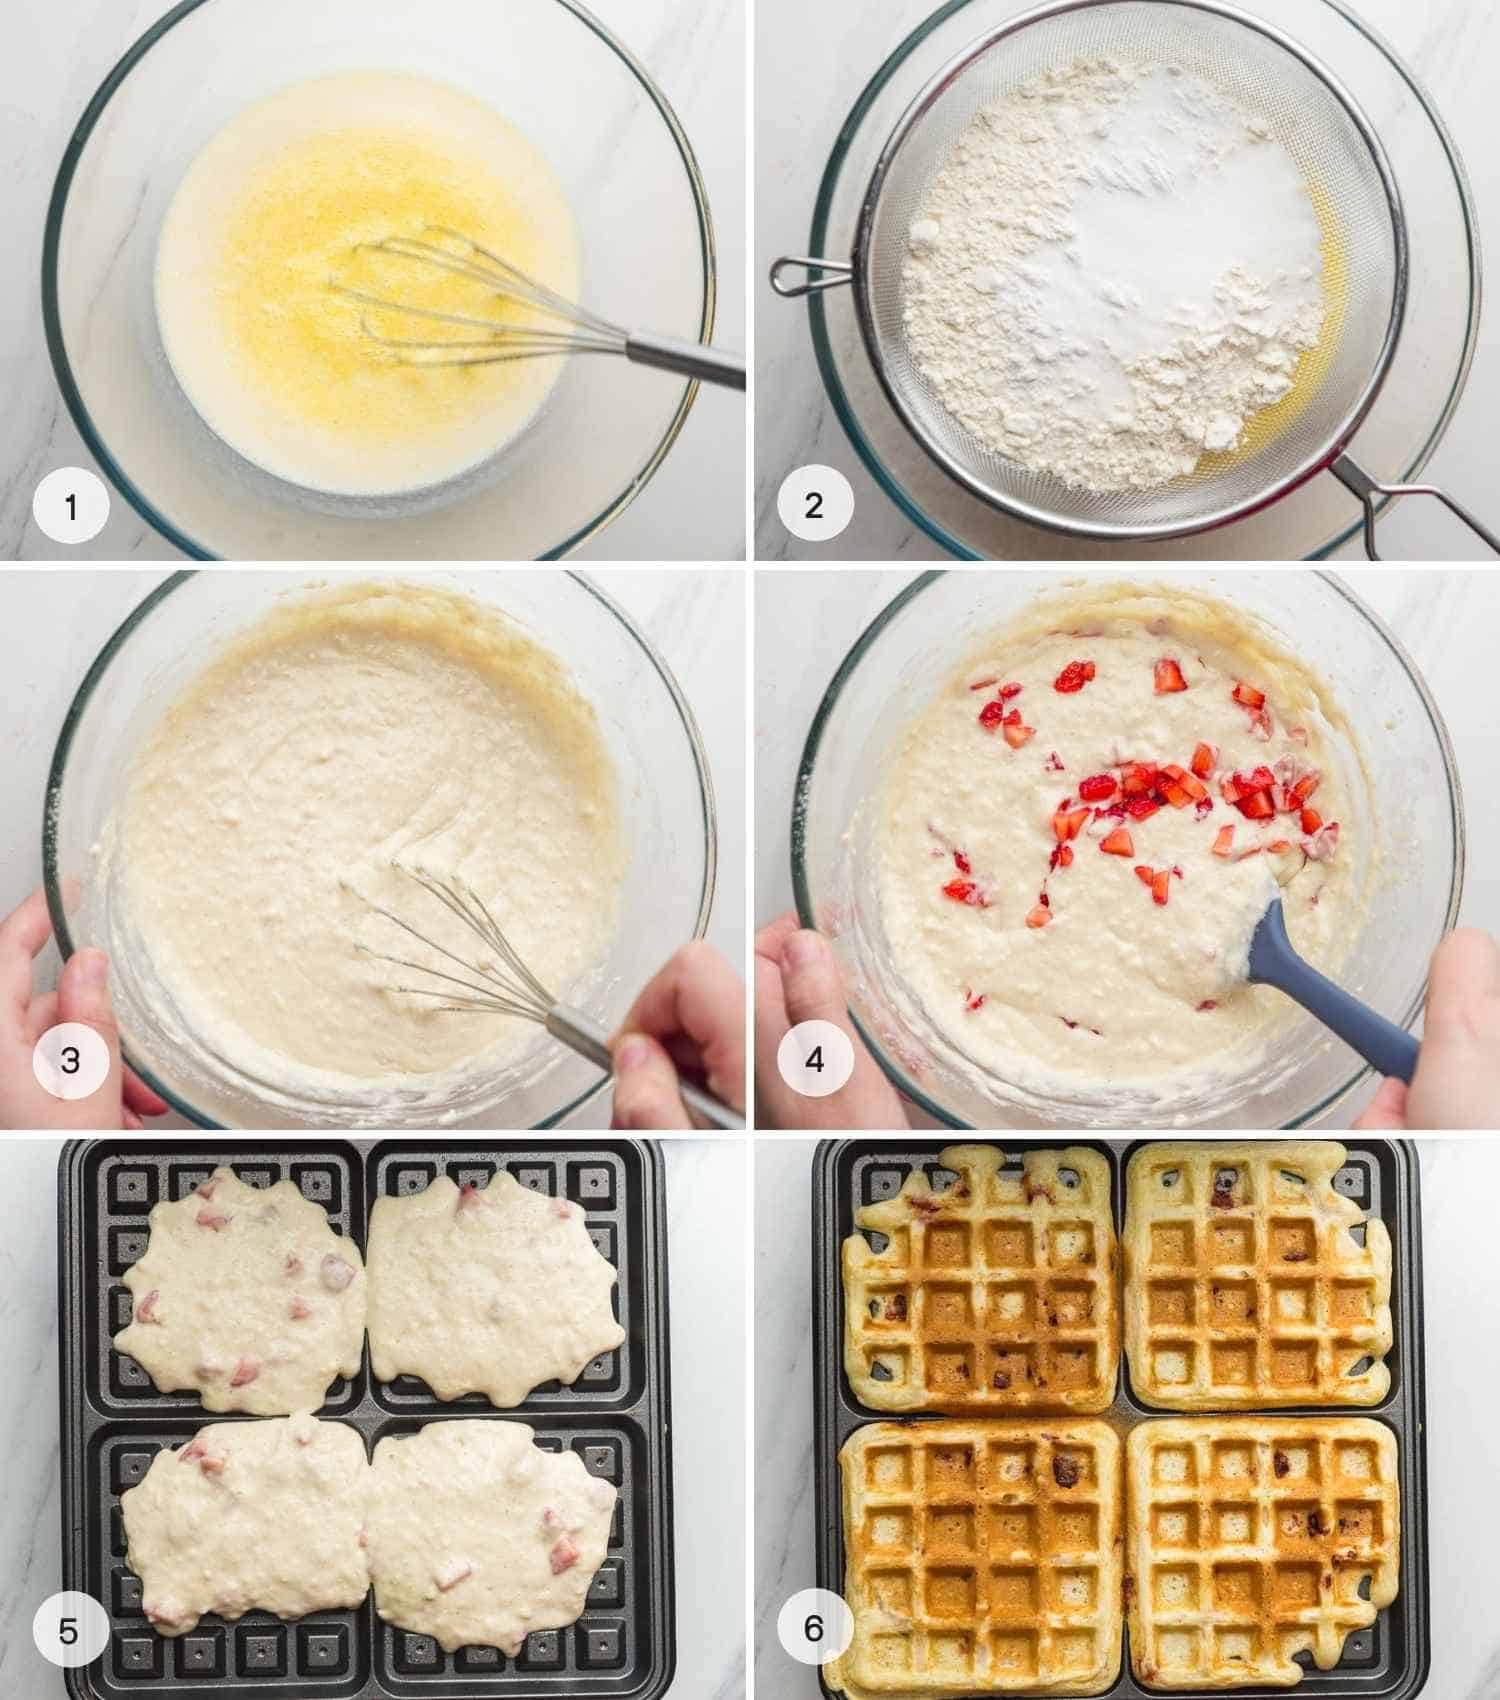 A collage with 6 images on how to make strawberry waffles from making the batter to cooking in a waffle iron